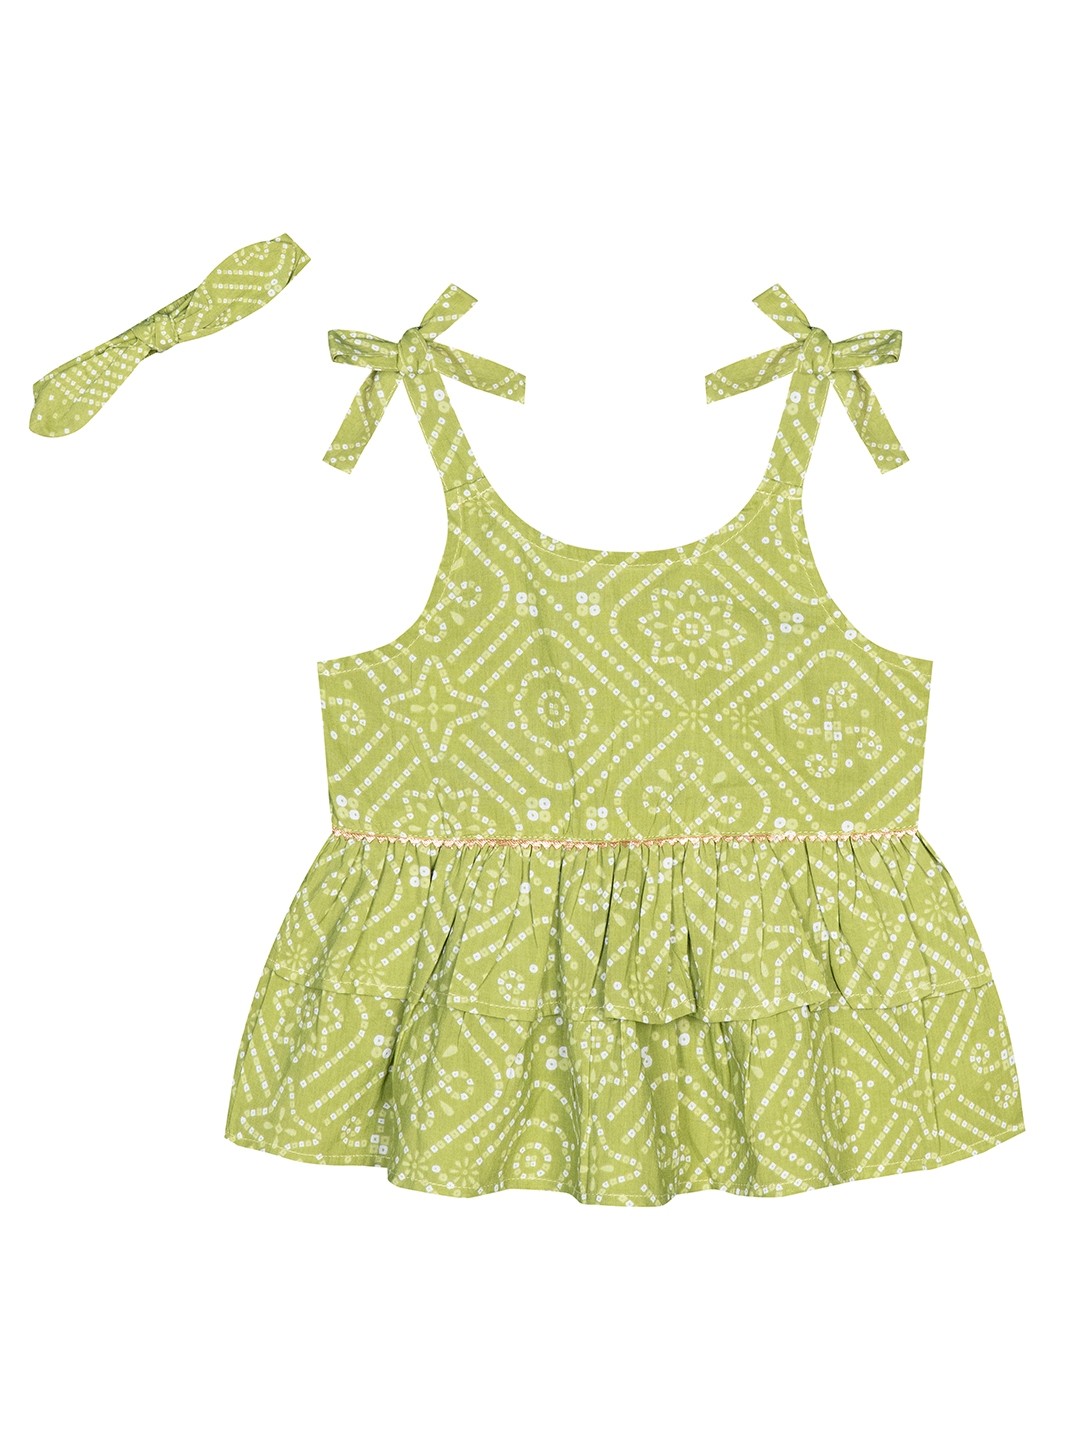 Budding Bees | Budding Bees Infants Cotton Top-Pajama Set with Matching Hairband-Green 2